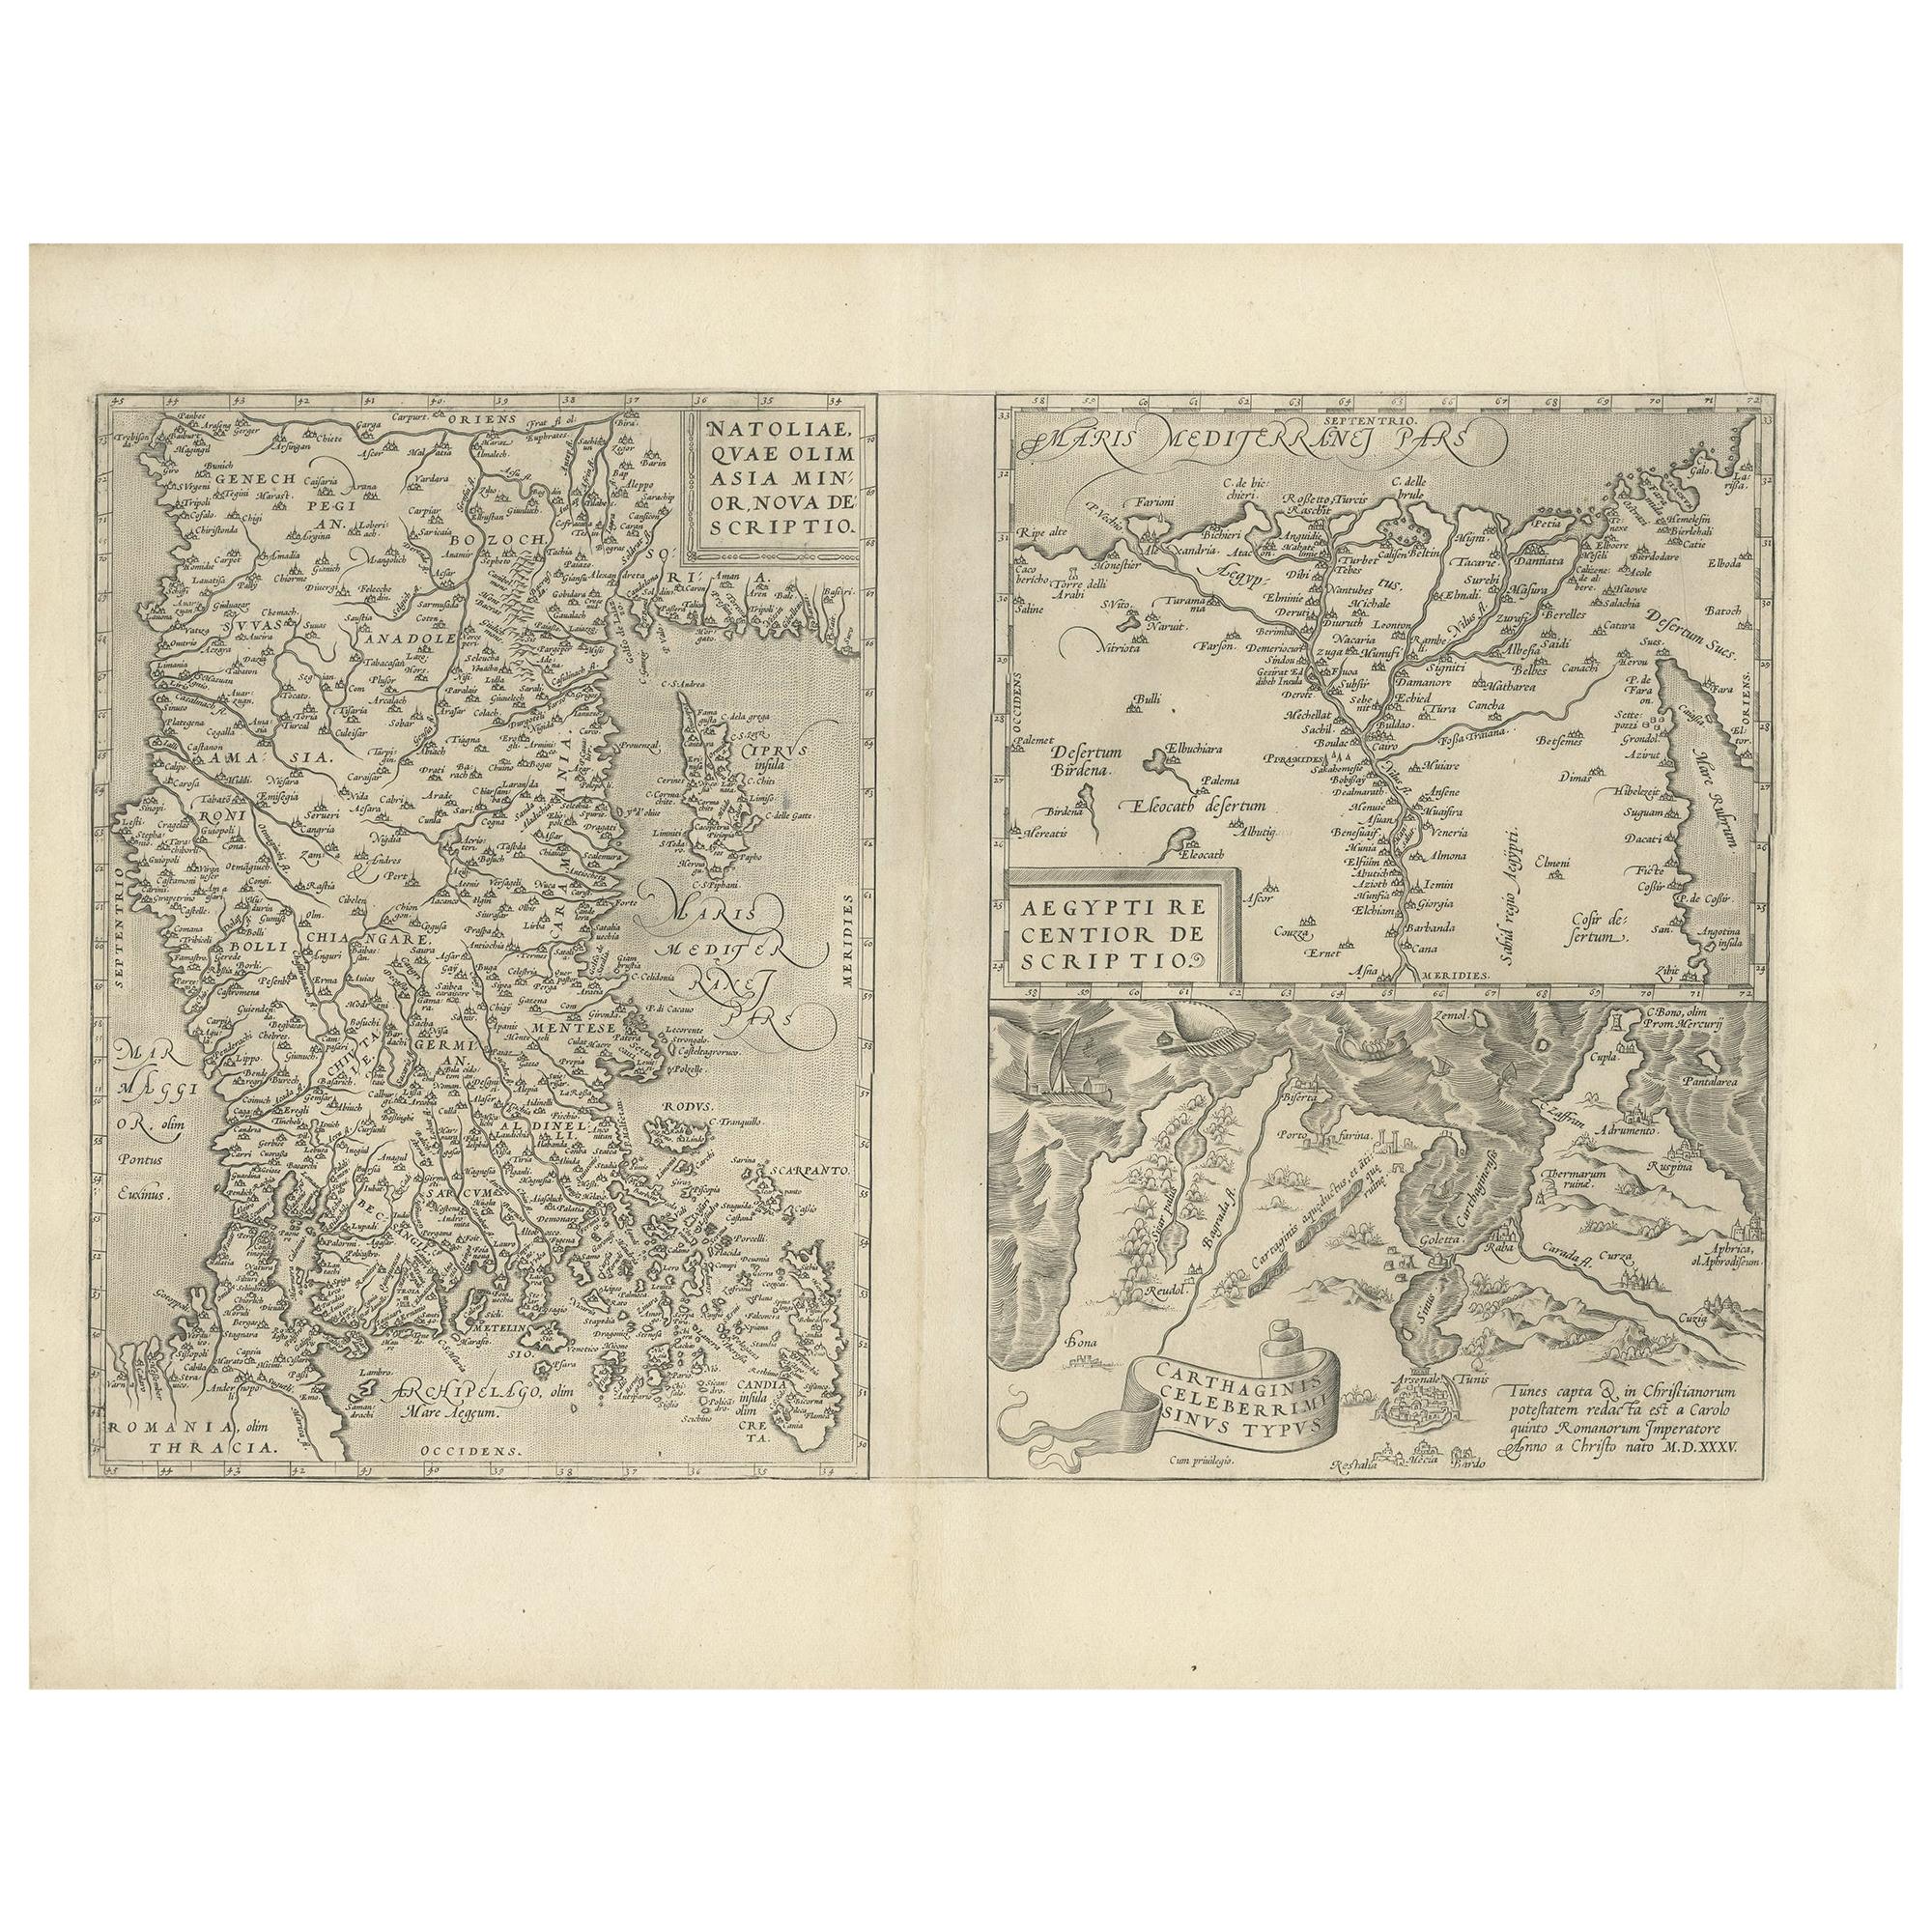 Antique Map of Asia Minor, Region of the Nile and Region of the City of Carthage For Sale